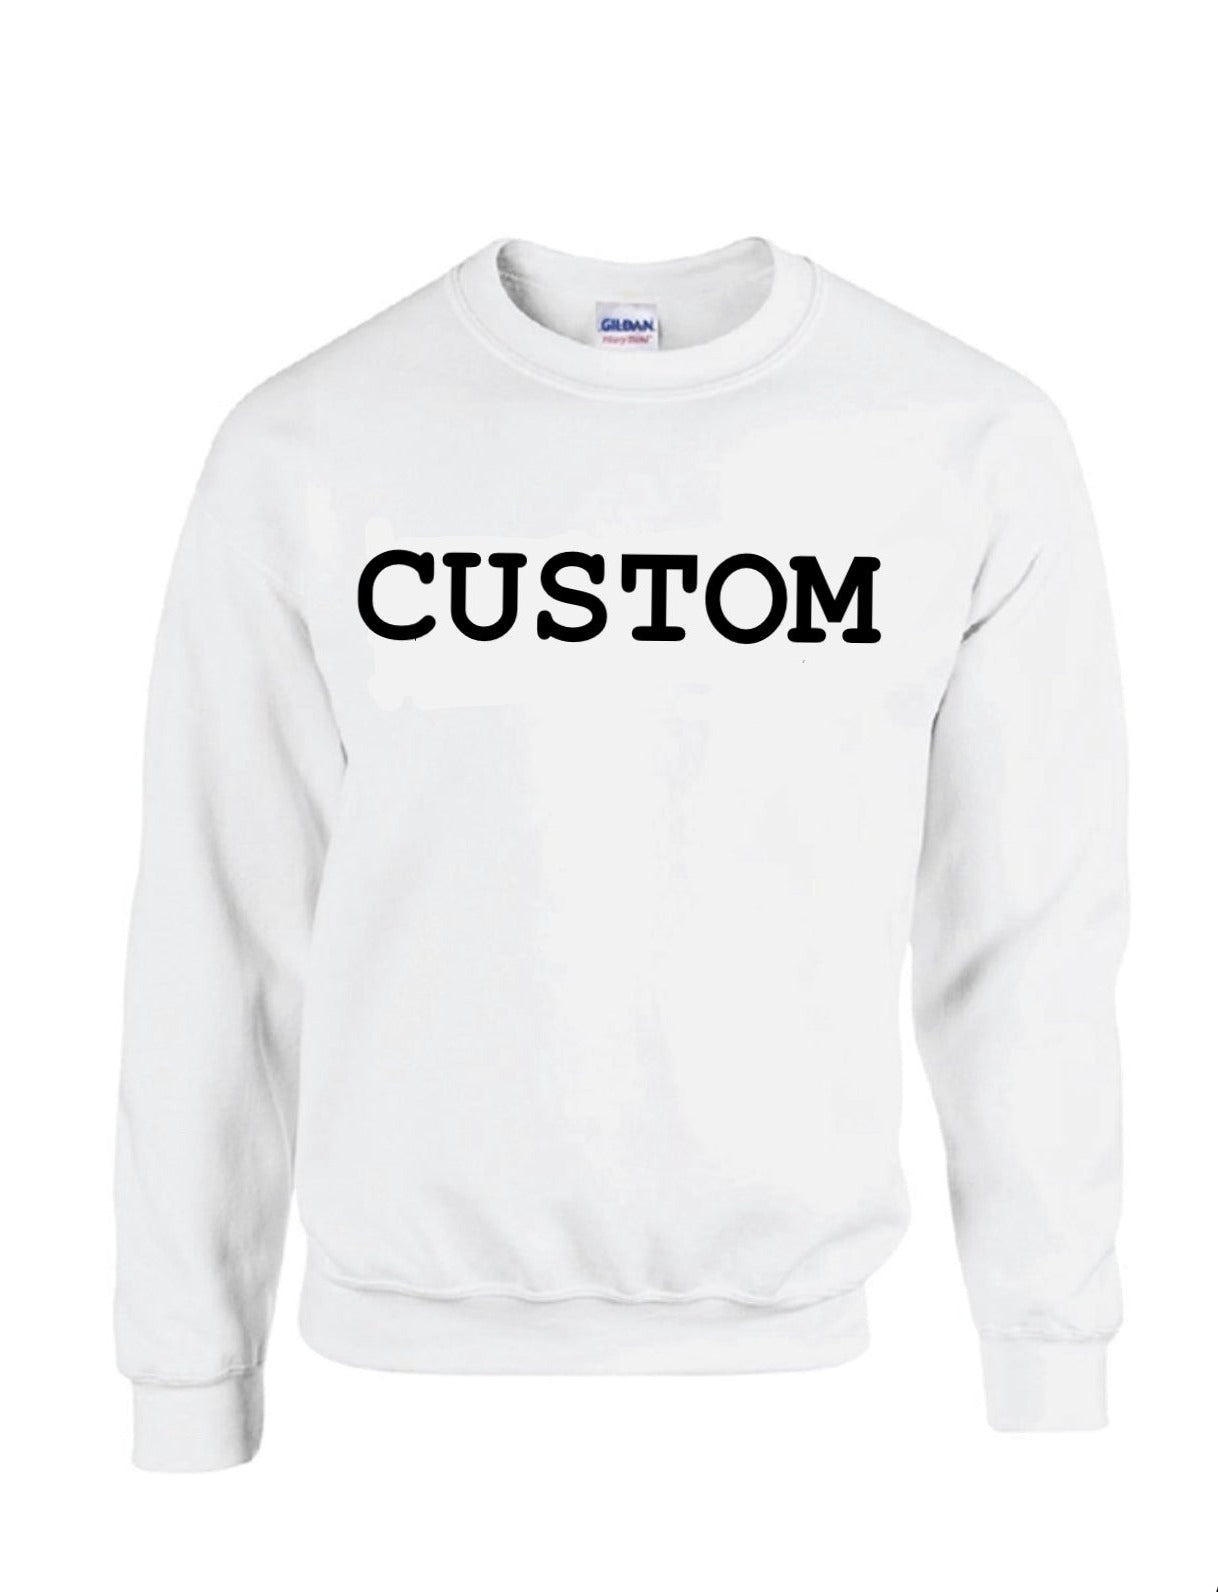 CUSTOM CREWNECK – The Valley Candle Co.